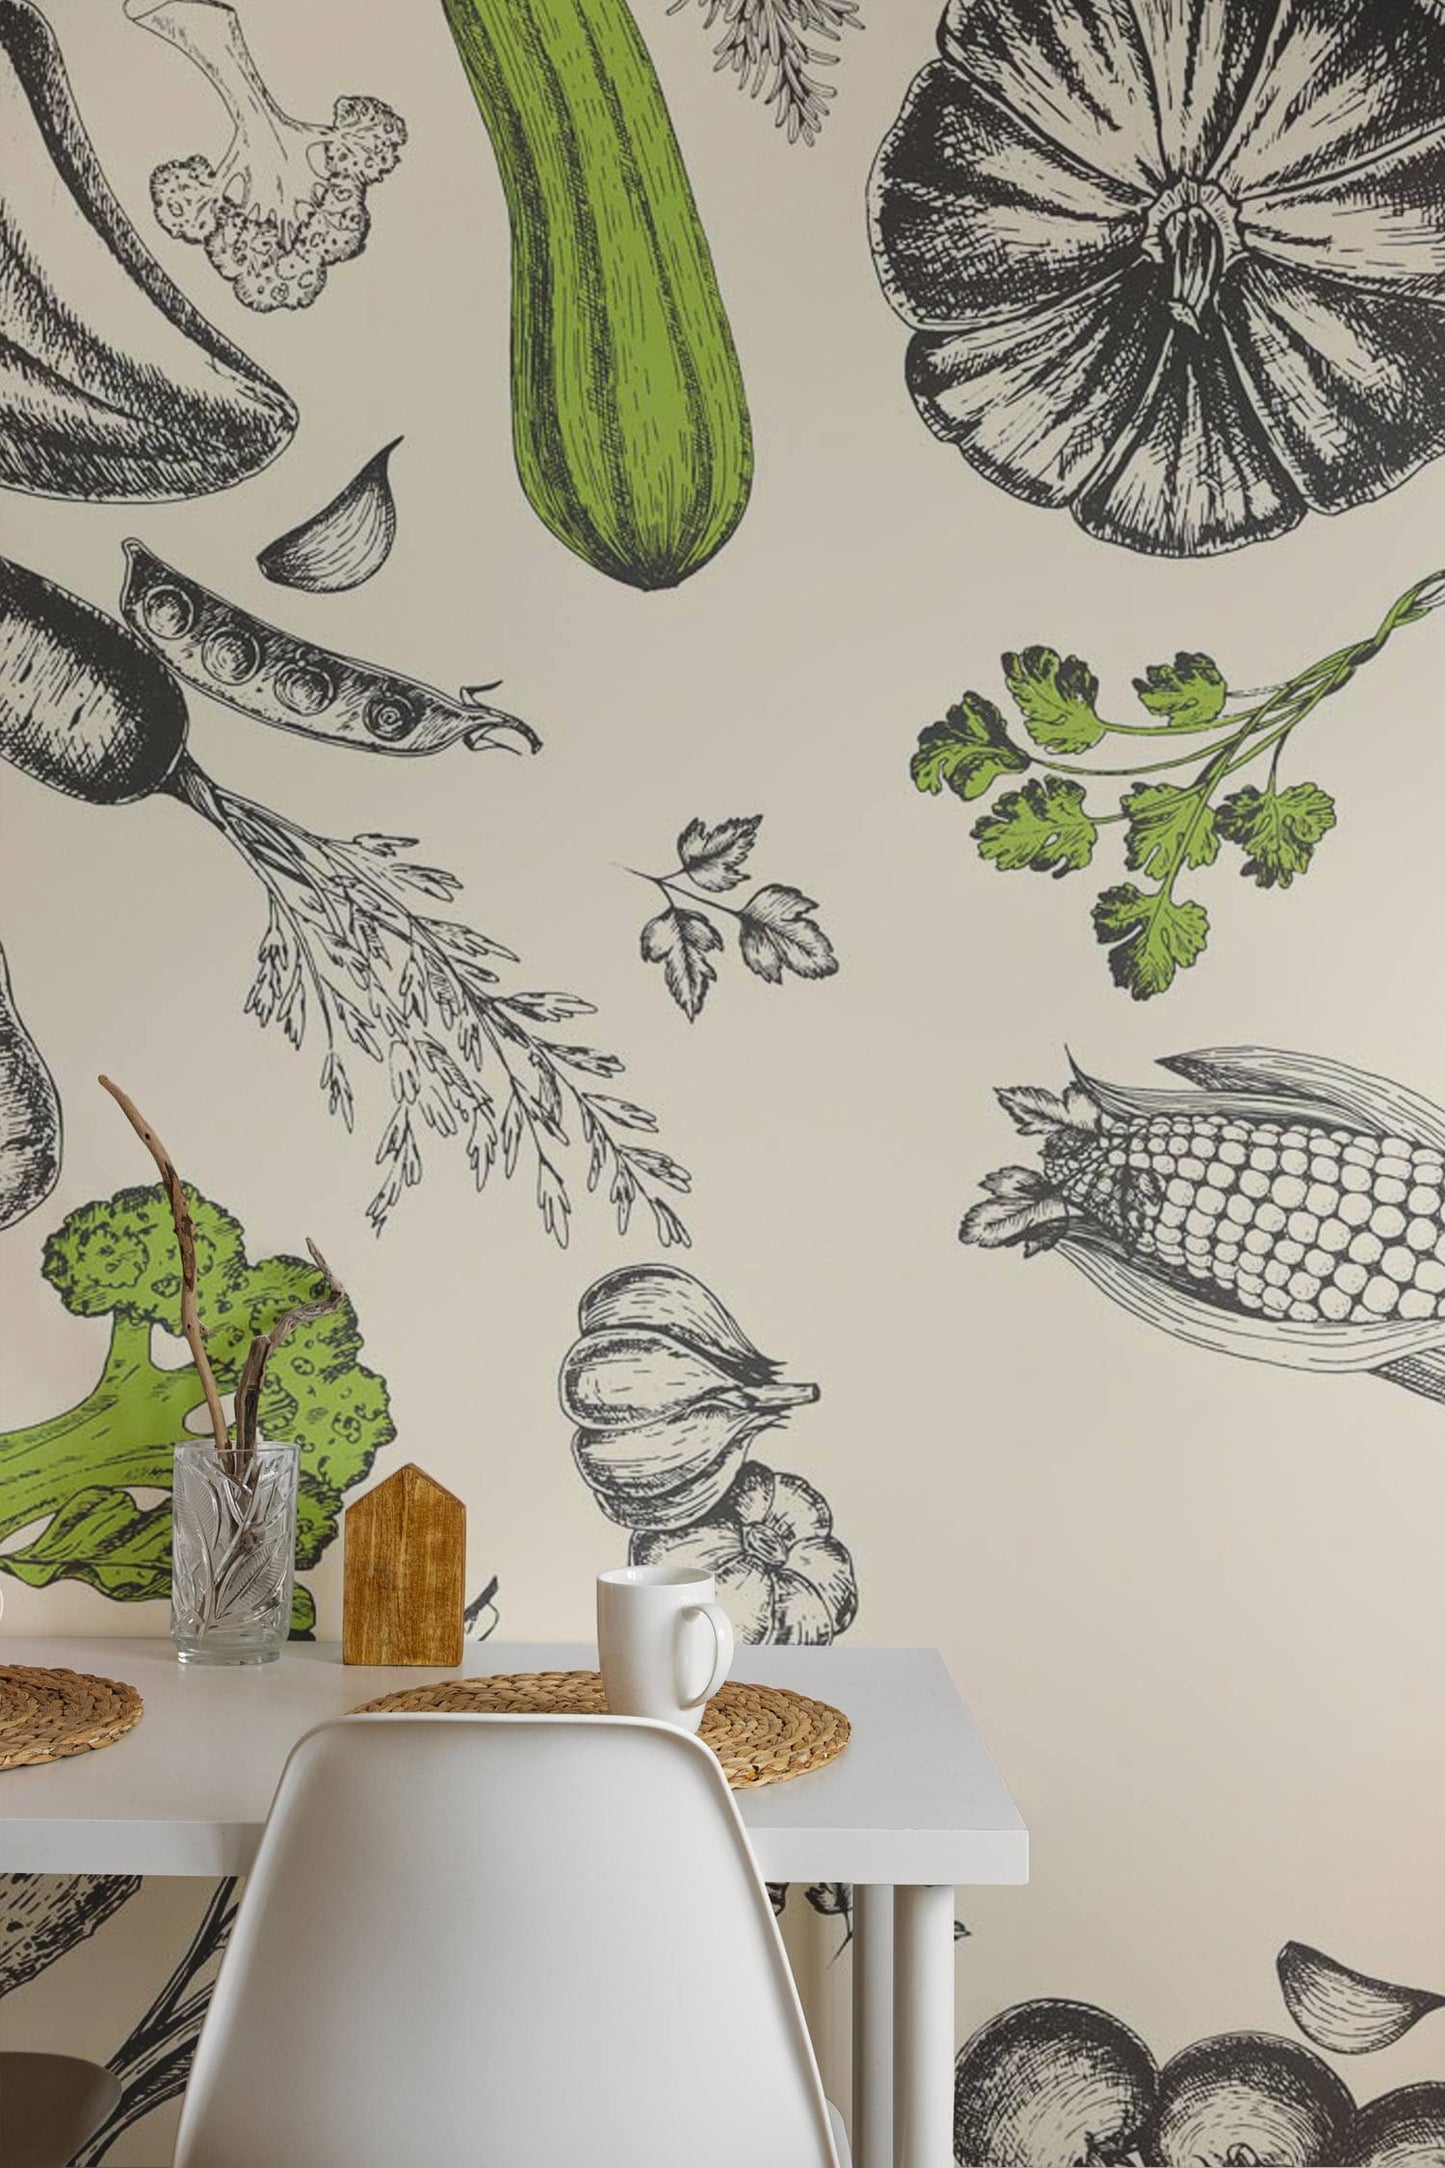 Wallpaper Mural with a Vegetable Pattern Effect for Use in Decorating the Dining Room